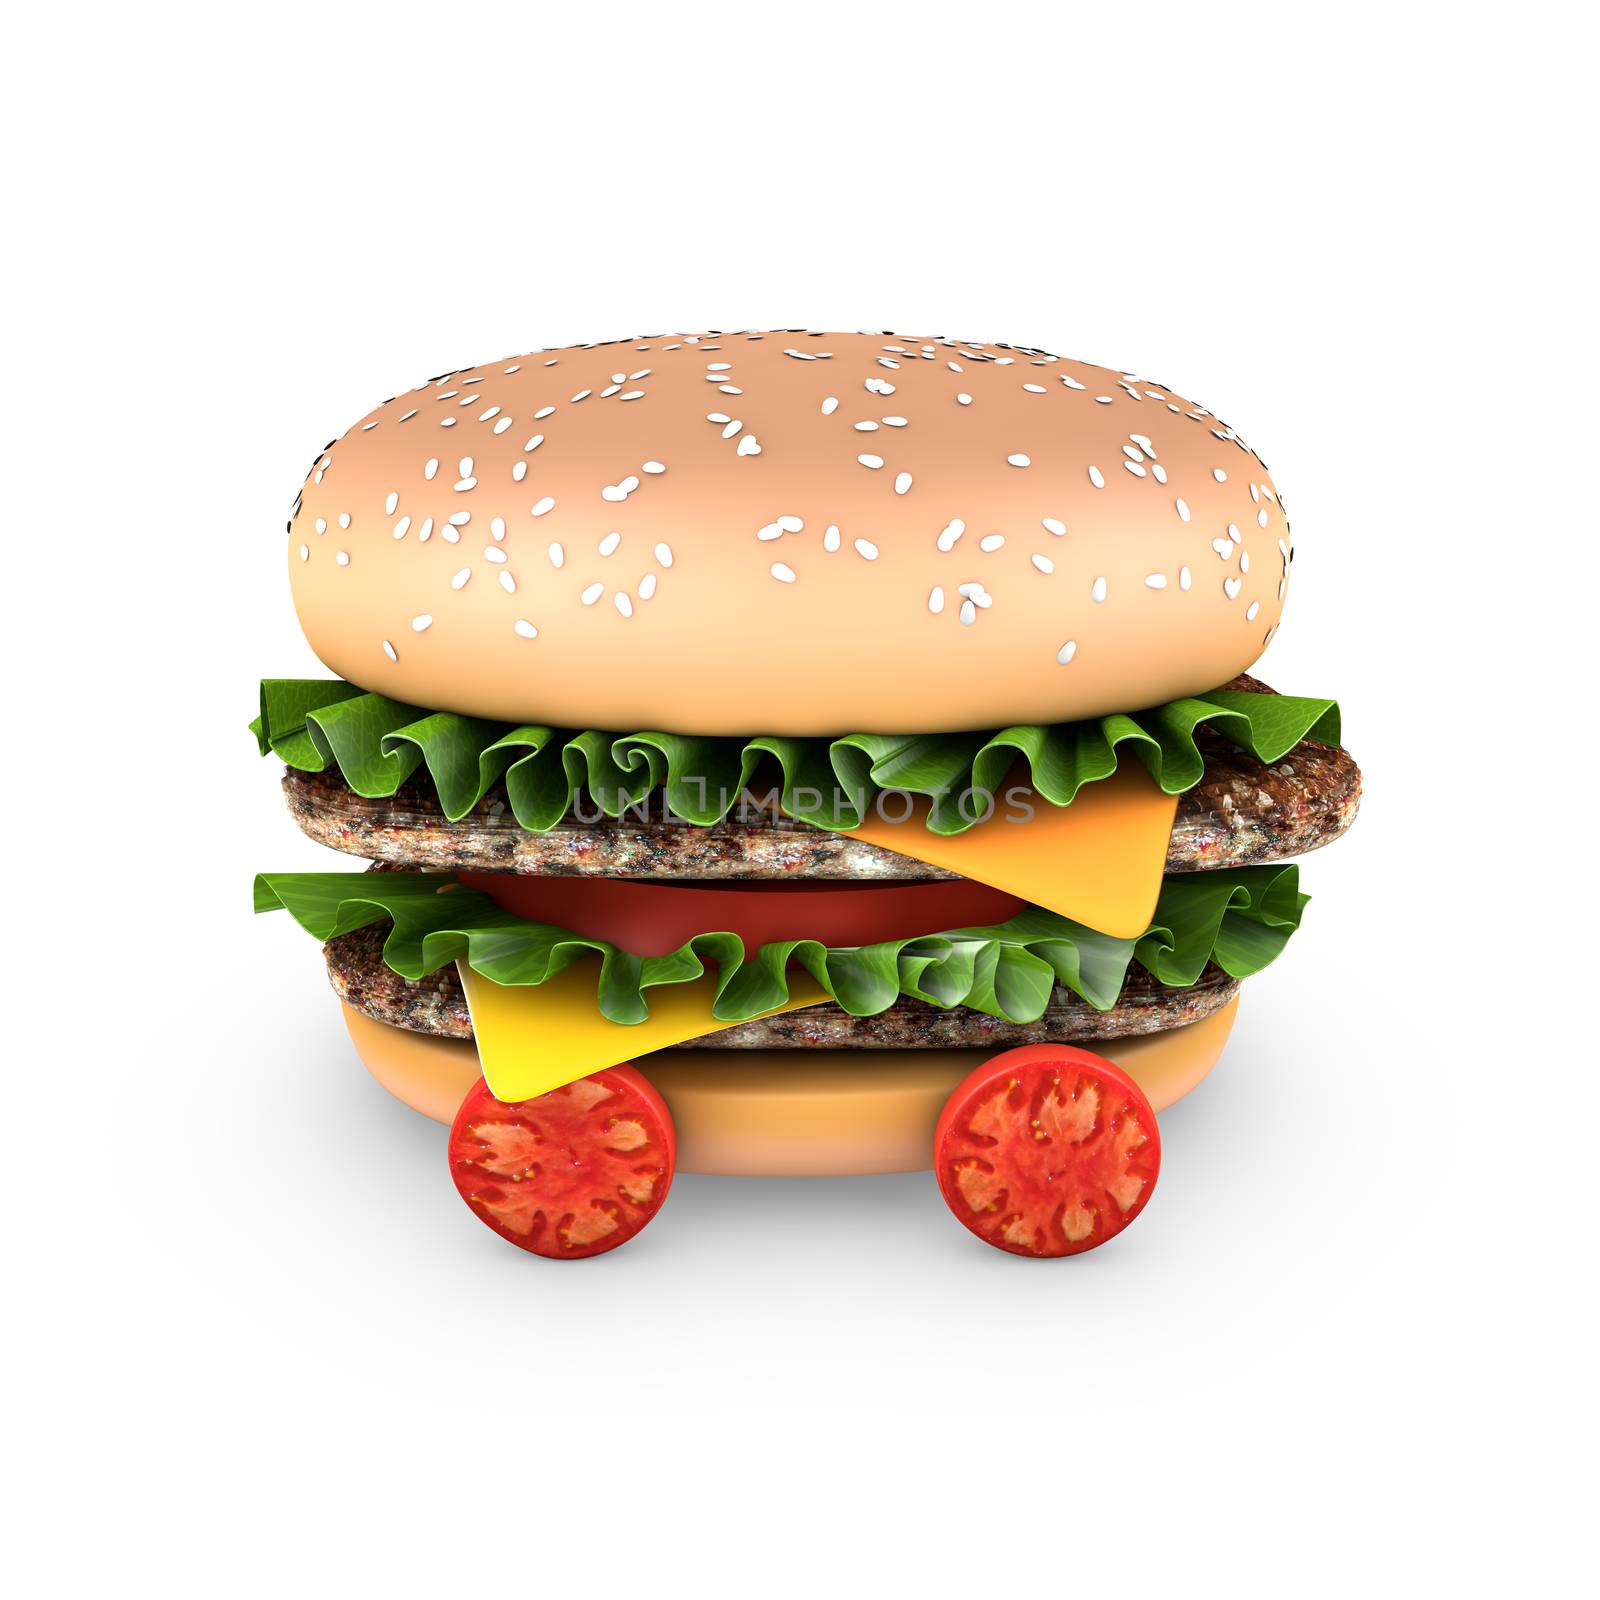 Hamburger with double steak, salad, cheese, and cherry tomatoes by ytjo